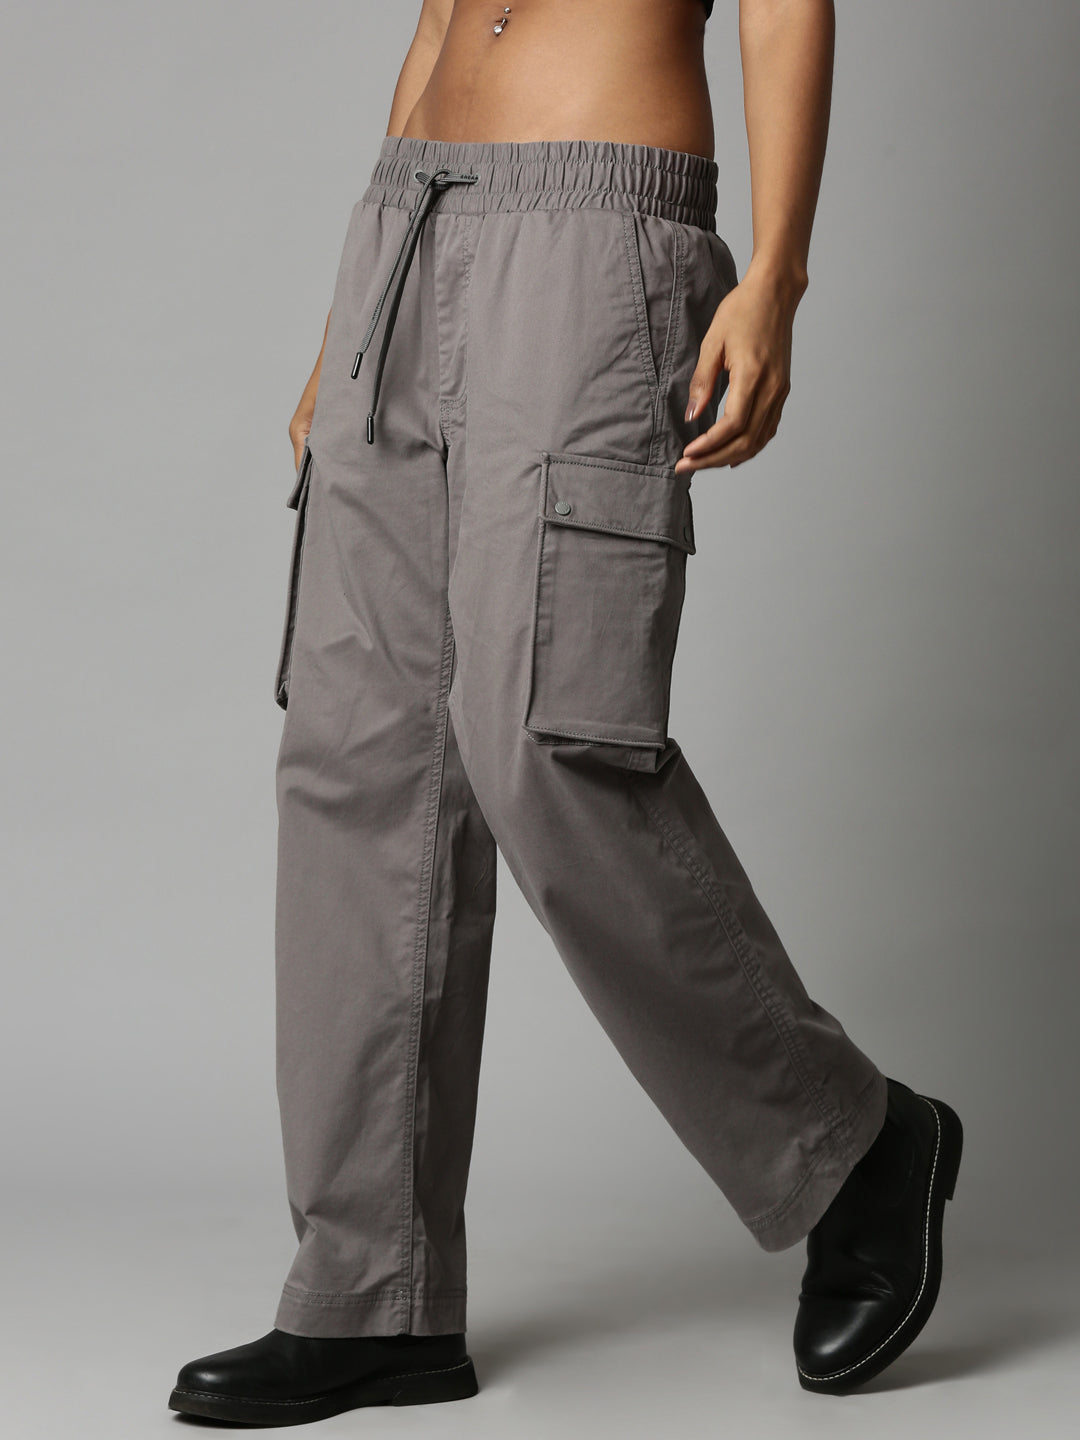 MEN'S GREY COLOR SLIM FIT CARGO PANTS, Comfortable Cargo, Latest Cargo,  Best Quality Cargo, Daily Wear